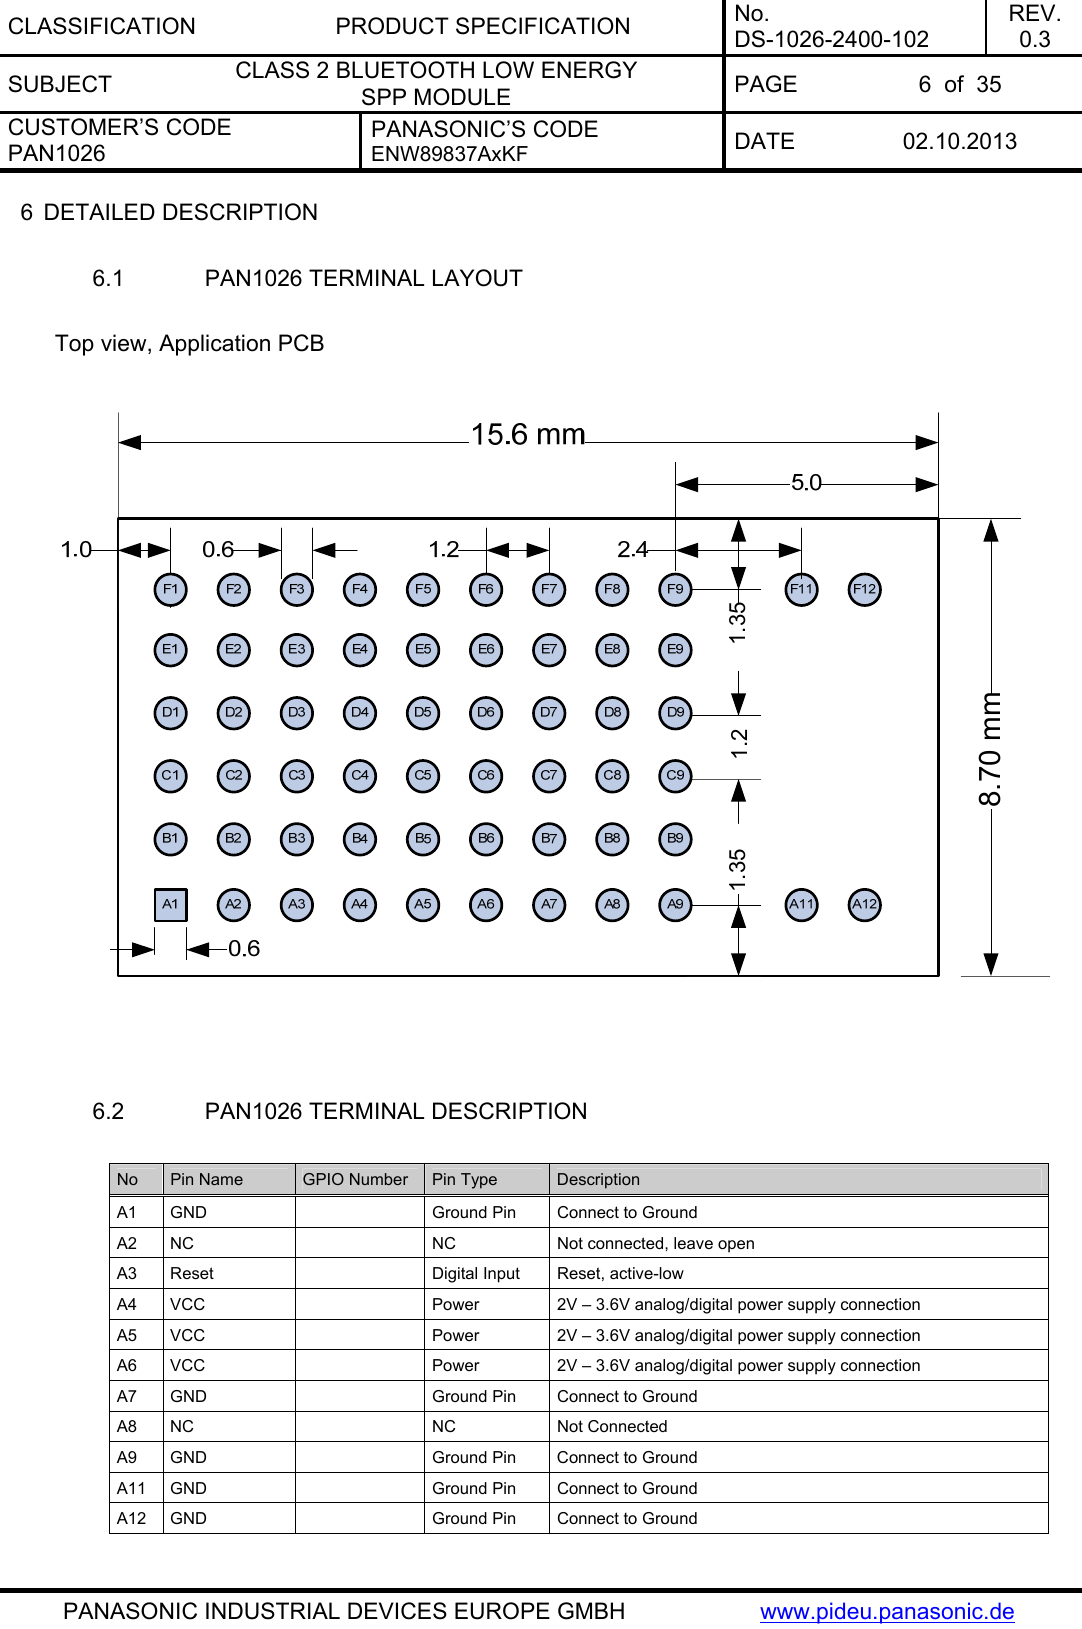 CLASSIFICATION PRODUCT SPECIFICATION No. DS-1026-2400-102 REV. 0.3 SUBJECT  CLASS 2 BLUETOOTH LOW ENERGY  SPP MODULE  PAGE  6  of  35 CUSTOMER’S CODE PAN1026 PANASONIC’S CODE ENW89837AxKF  DATE 02.10.2013   PANASONIC INDUSTRIAL DEVICES EUROPE GMBH  www.pideu.panasonic.de 6  DETAILED DESCRIPTION  6.1  PAN1026 TERMINAL LAYOUT  Top view, Application PCB  6.2  PAN1026 TERMINAL DESCRIPTION    8.70 mm1.35 1.351.2  No  Pin Name  GPIO Number  Pin Type  Description A1 GND   Ground Pin  nd Connect to GrouA2 NC   NC  Not connected, leave open A3 Reset  al Input  Digit Reset, active-low A4 VCC   Power  2V – 3.6V analog/digital power supply connection A5 VCC   Power  2V – 3.6V analog/digital power supply connection A6 VCC   Power  2V – 3.6V analog/digital power supply connection A7 GND   Ground Pin  Connect to Ground A8 NC   NC Not Connected A9 GND  nd Pin  nd  Grou Connect to GrouA11 GND   Ground Pin  Connect to Ground A12 GND   Ground Pin  Connect to Ground 